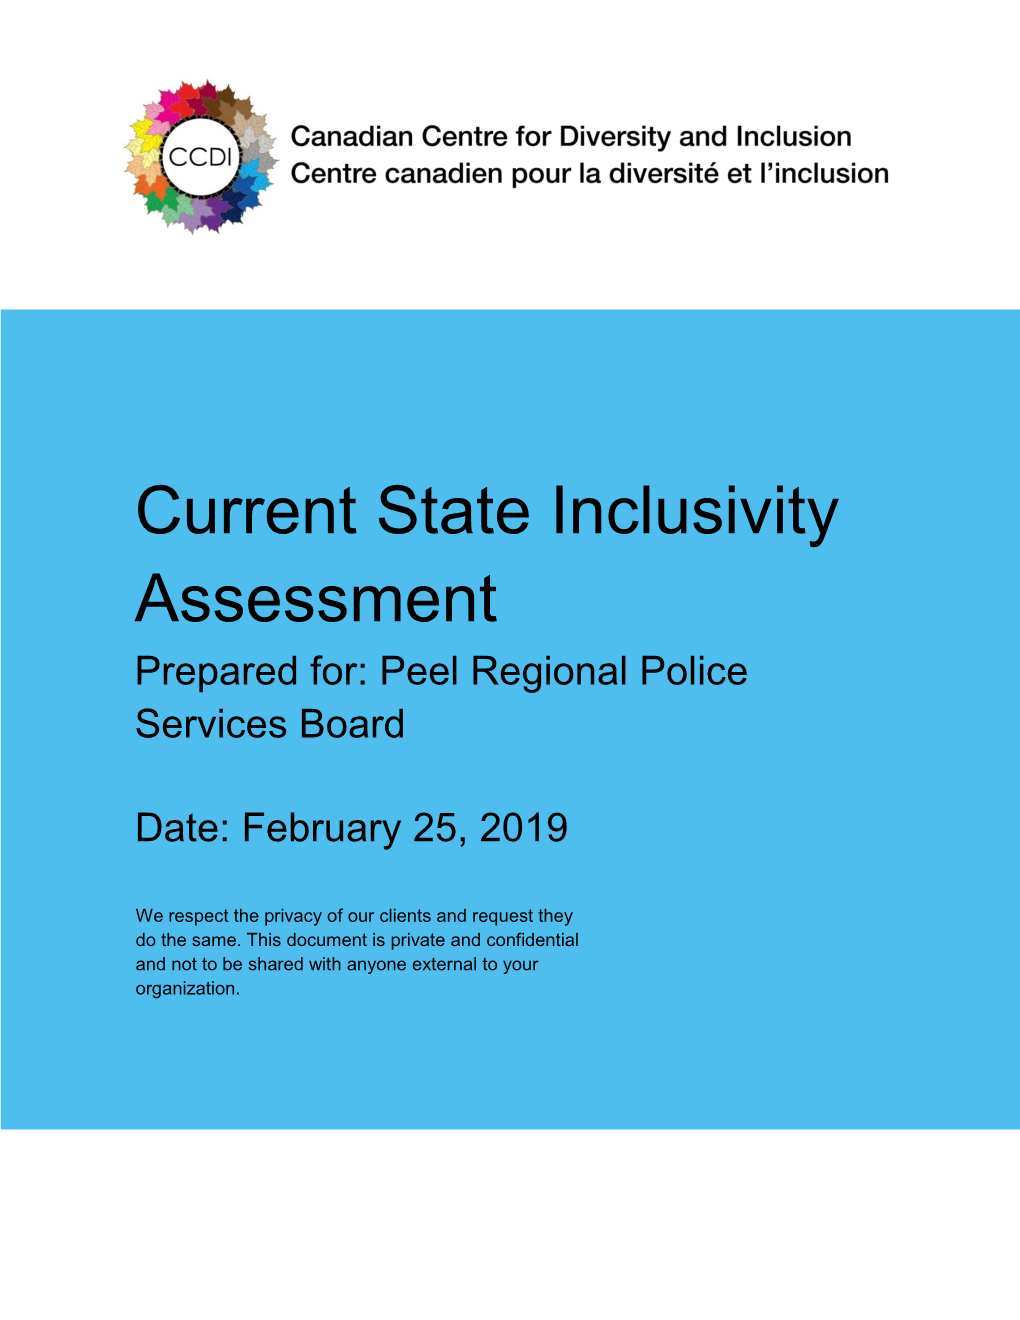 Diversity and Inclusion Census Assessment